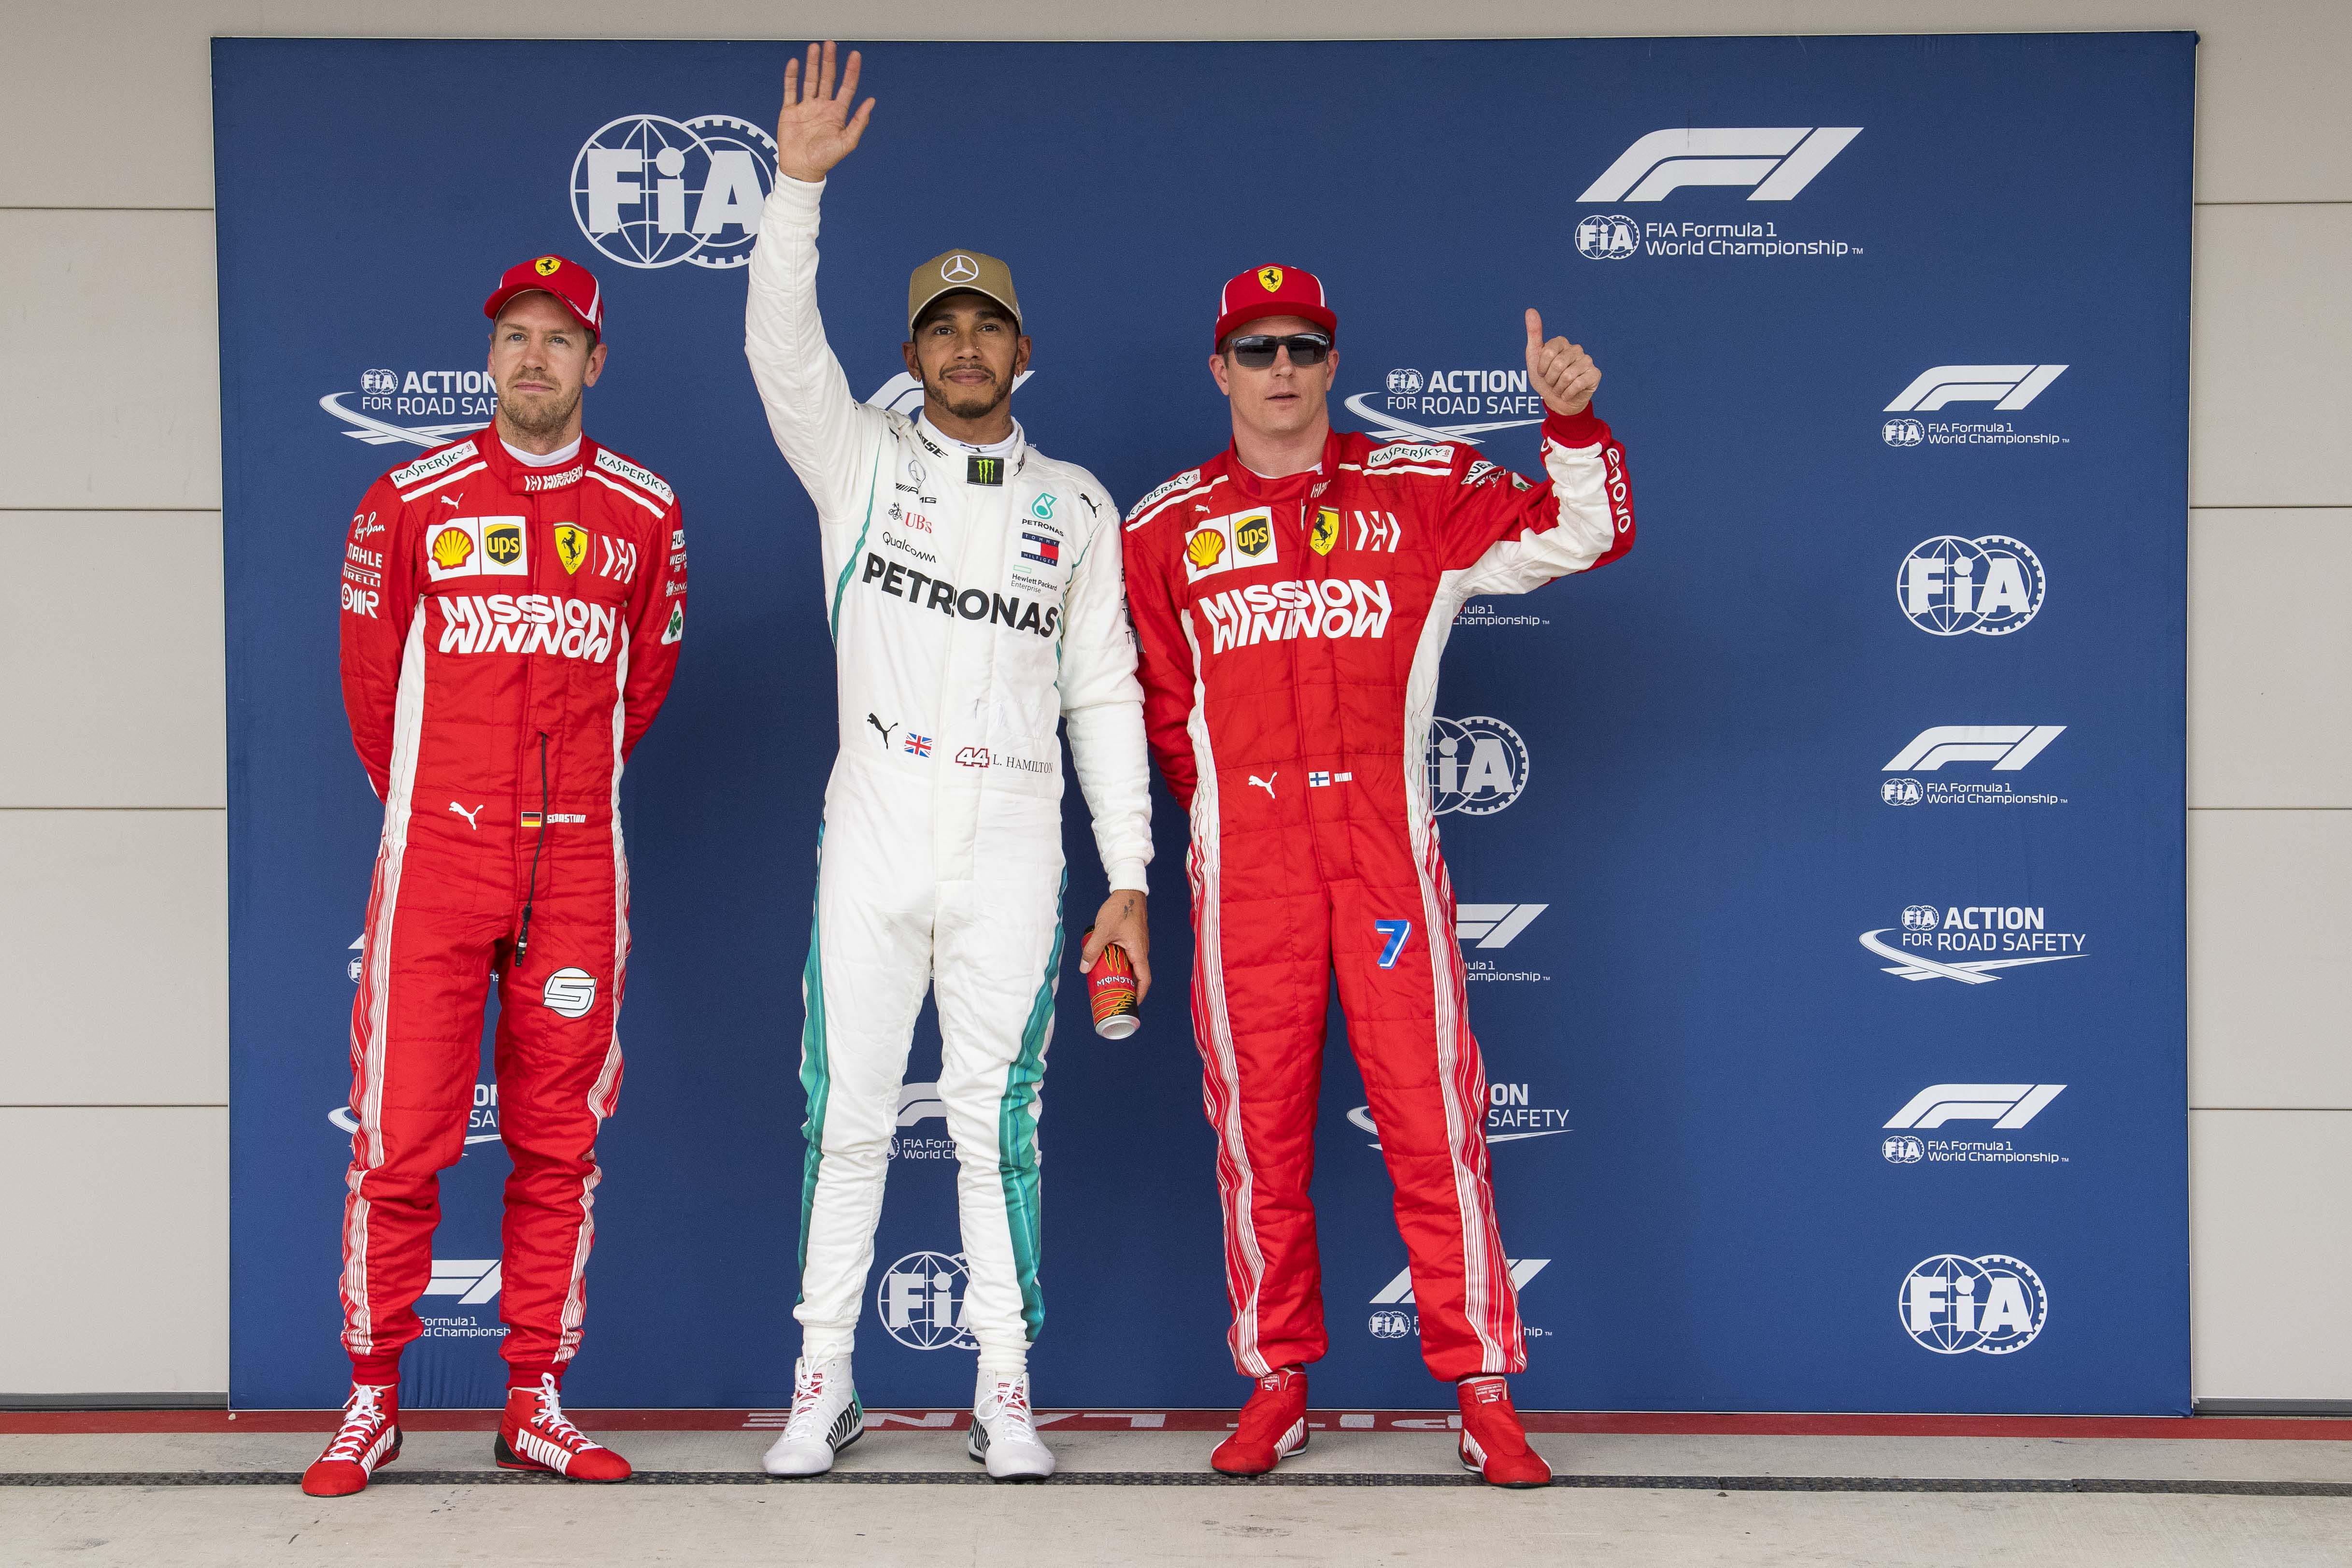 Motorsport: Hamilton takes US pole with fifth title in sight